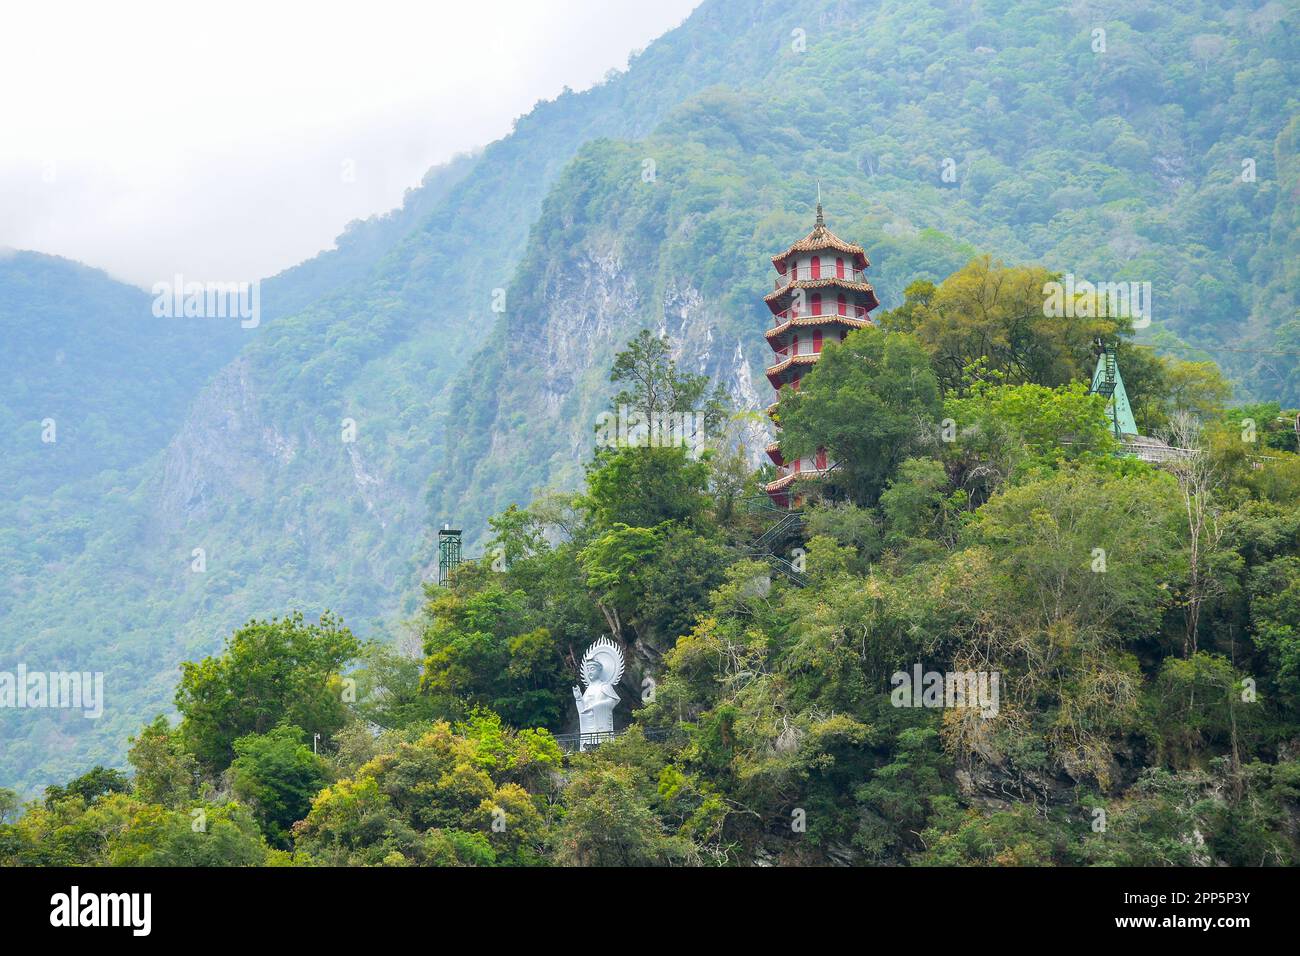 Chinese pagoda and Buddha statue at the top of mountain in Taroko National Park gorge in Hualien, Xiulin Township, Taiwan Stock Photo